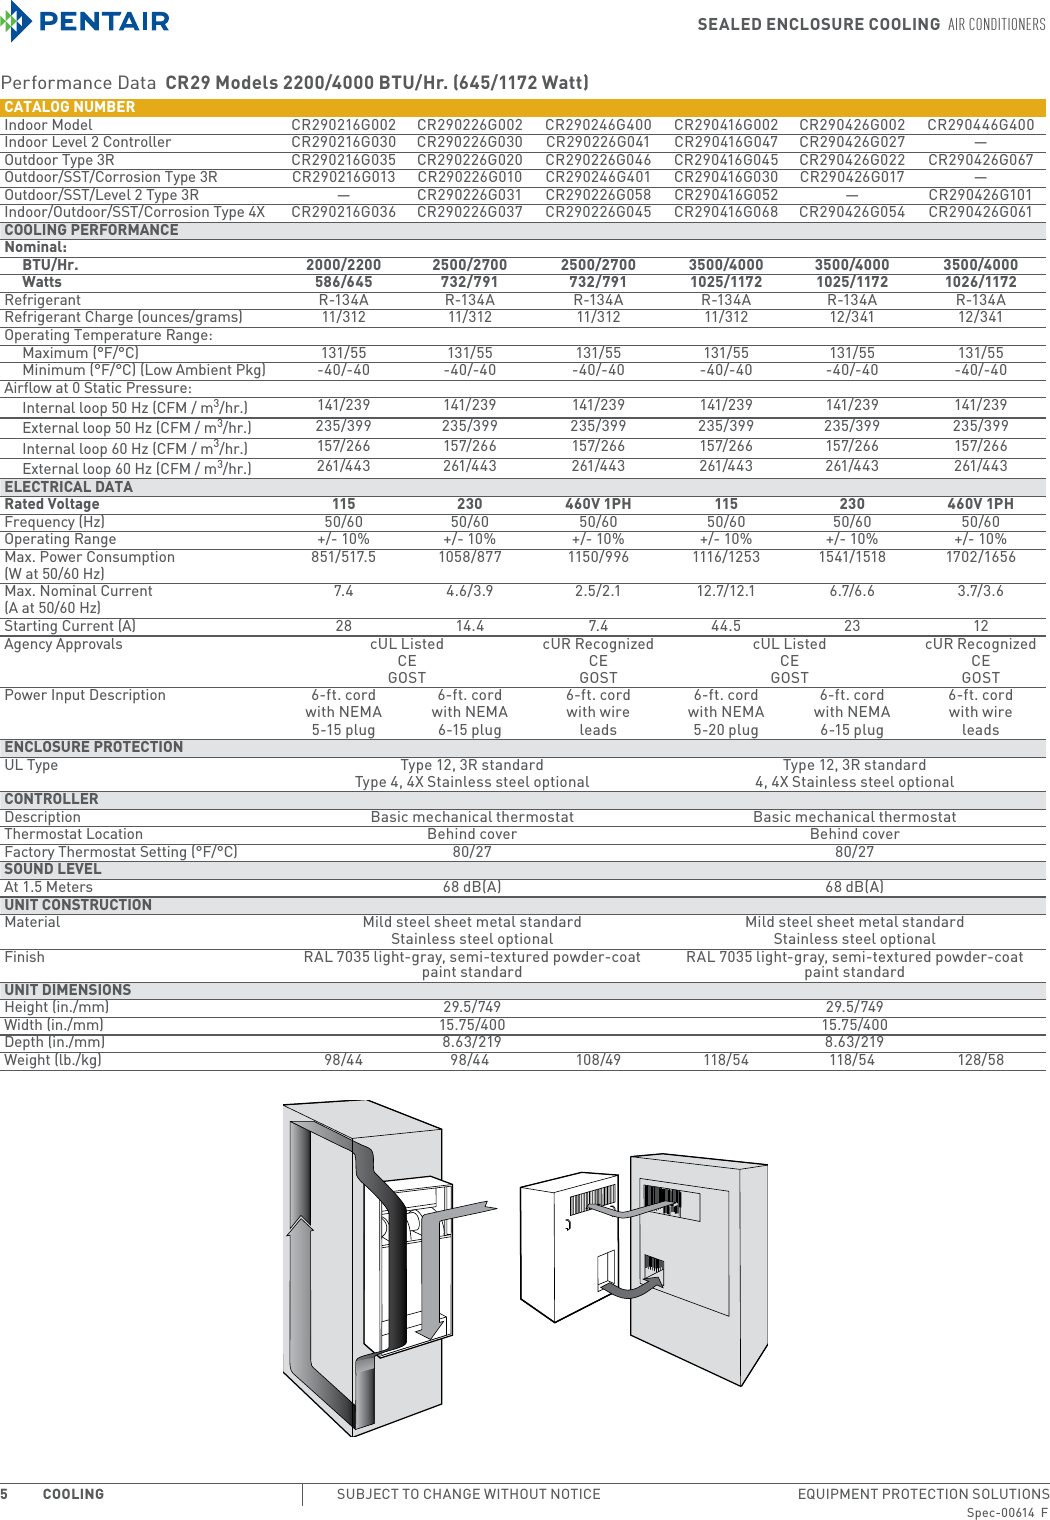 Page 5 of 10 - Air Conditioners  Brochure